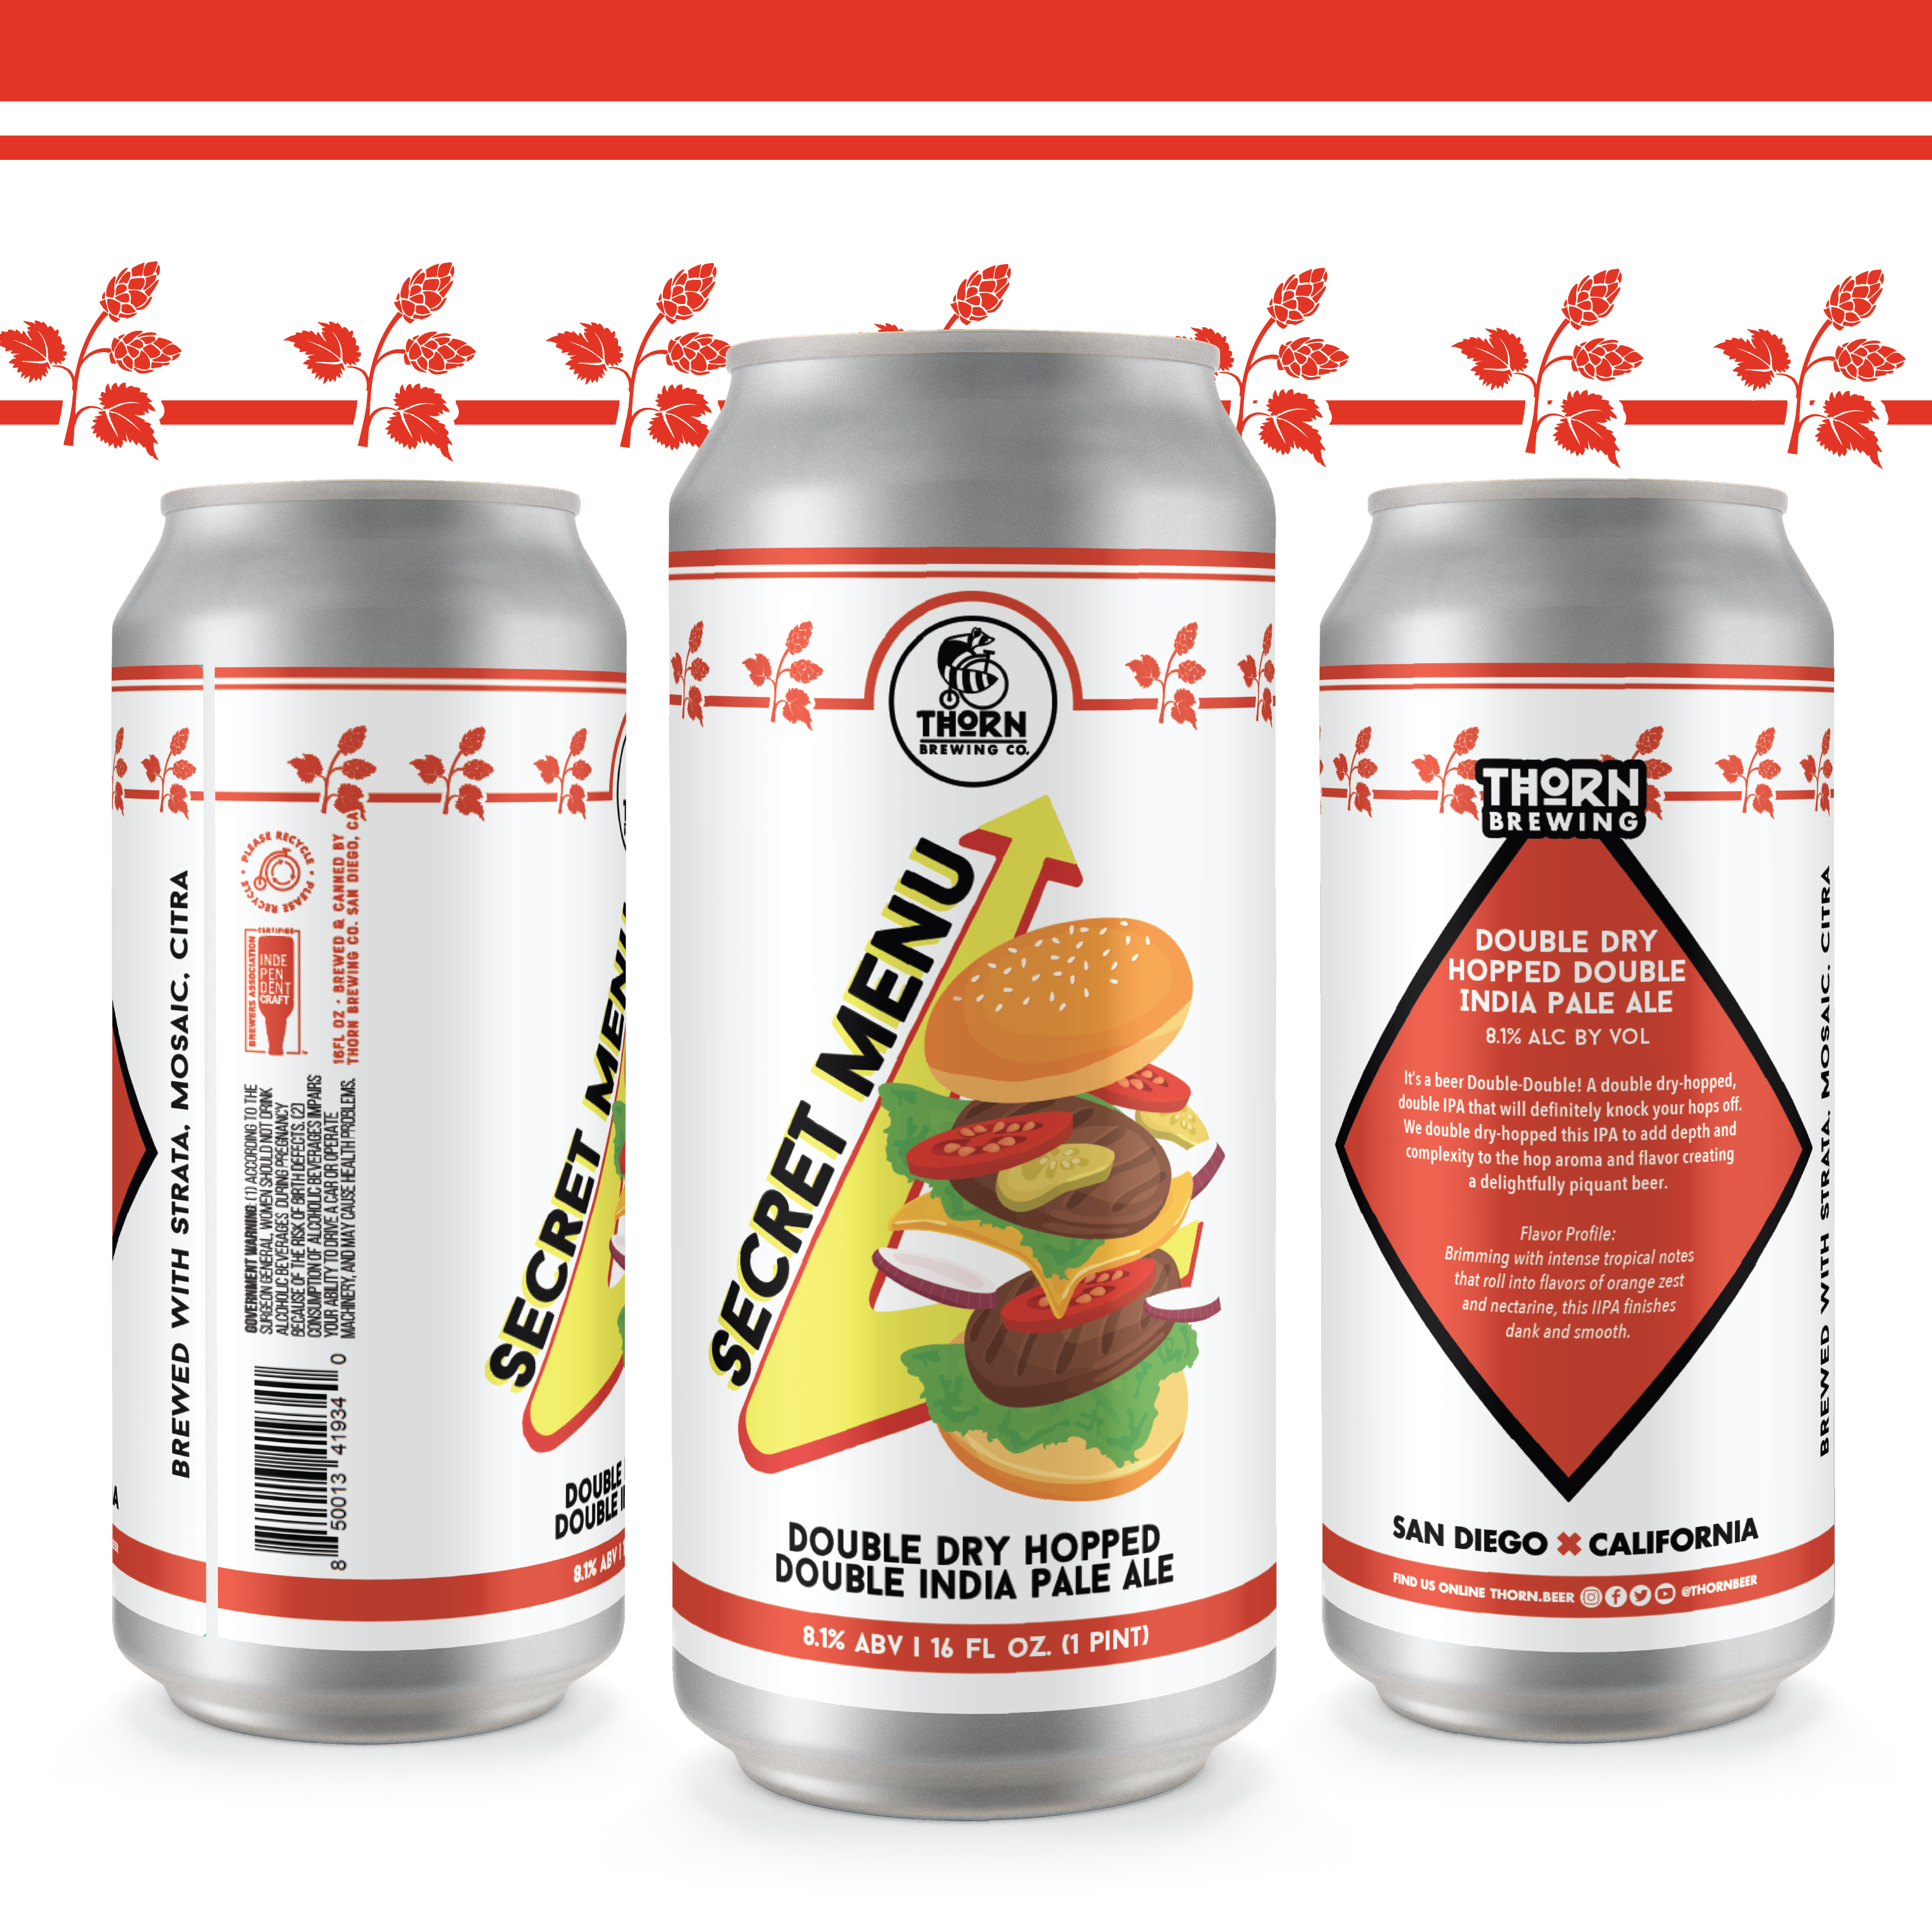 Three cans of secret menu IPA from Thorn brewing. White cans with red accents